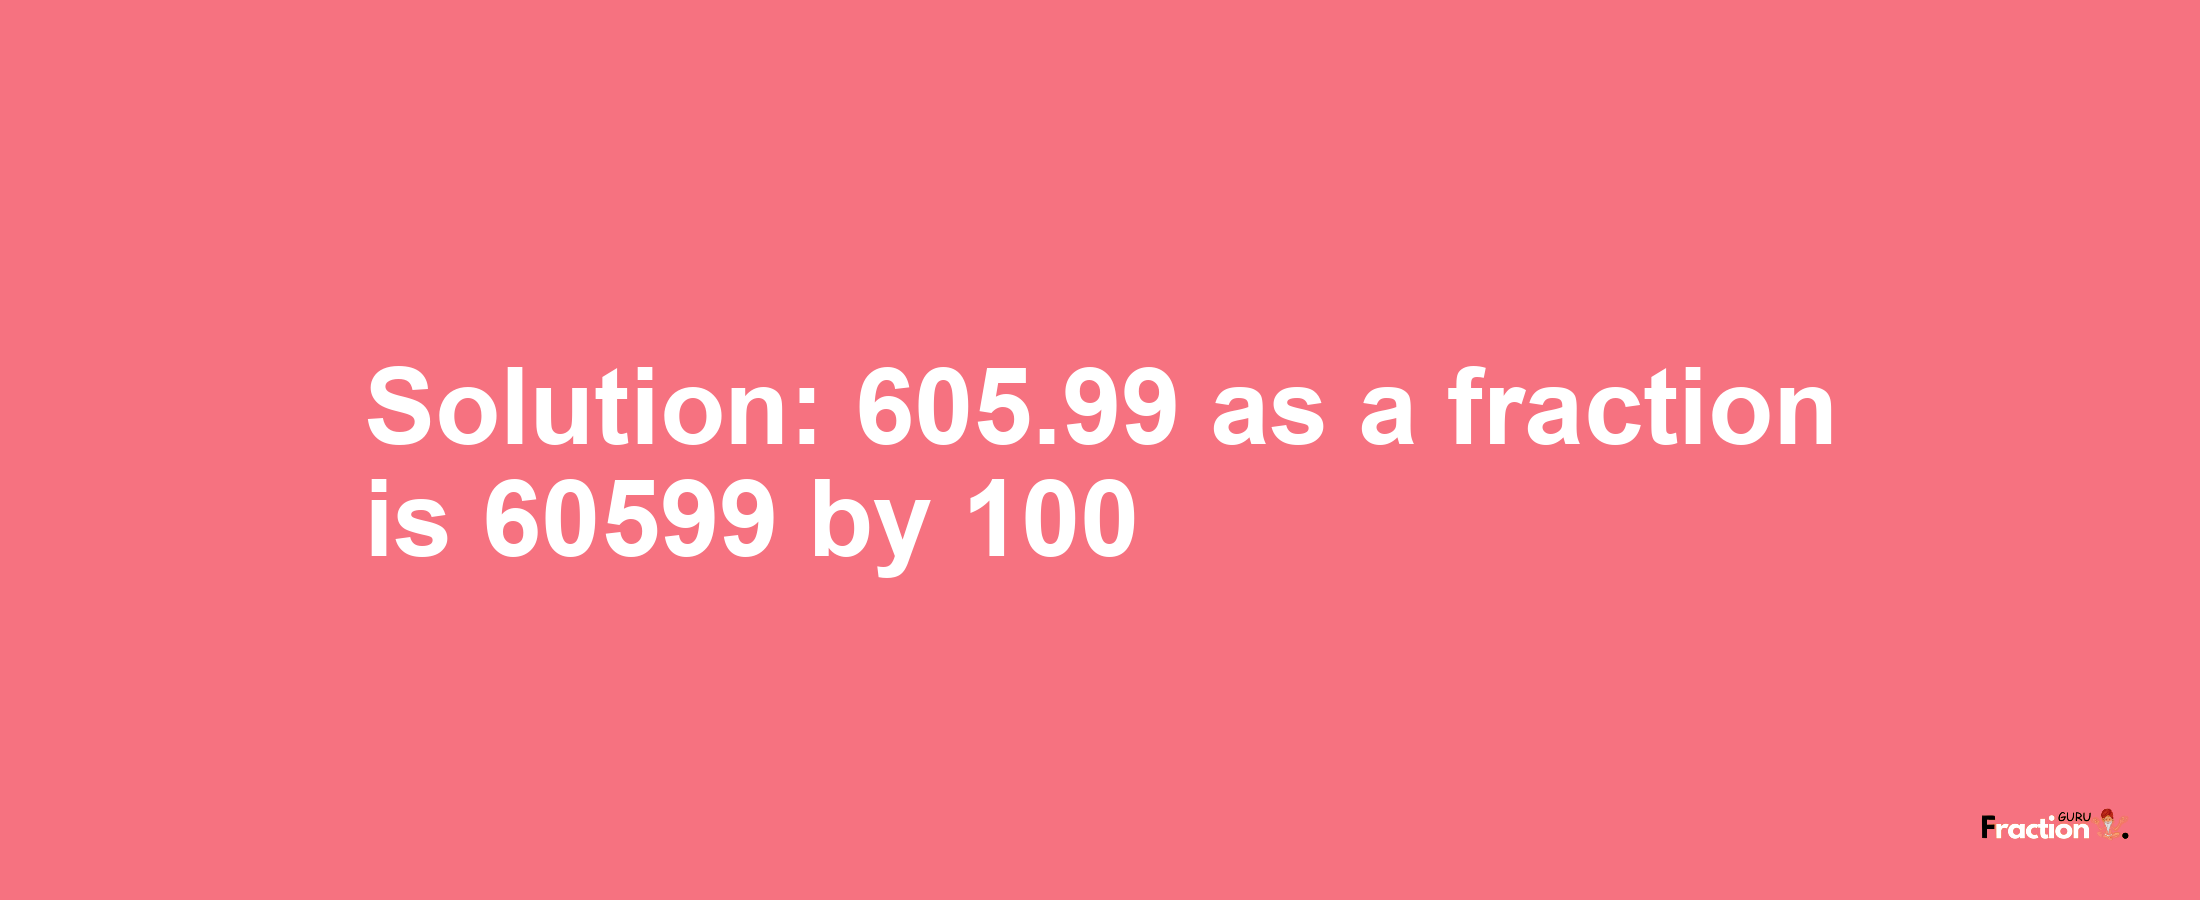 Solution:605.99 as a fraction is 60599/100